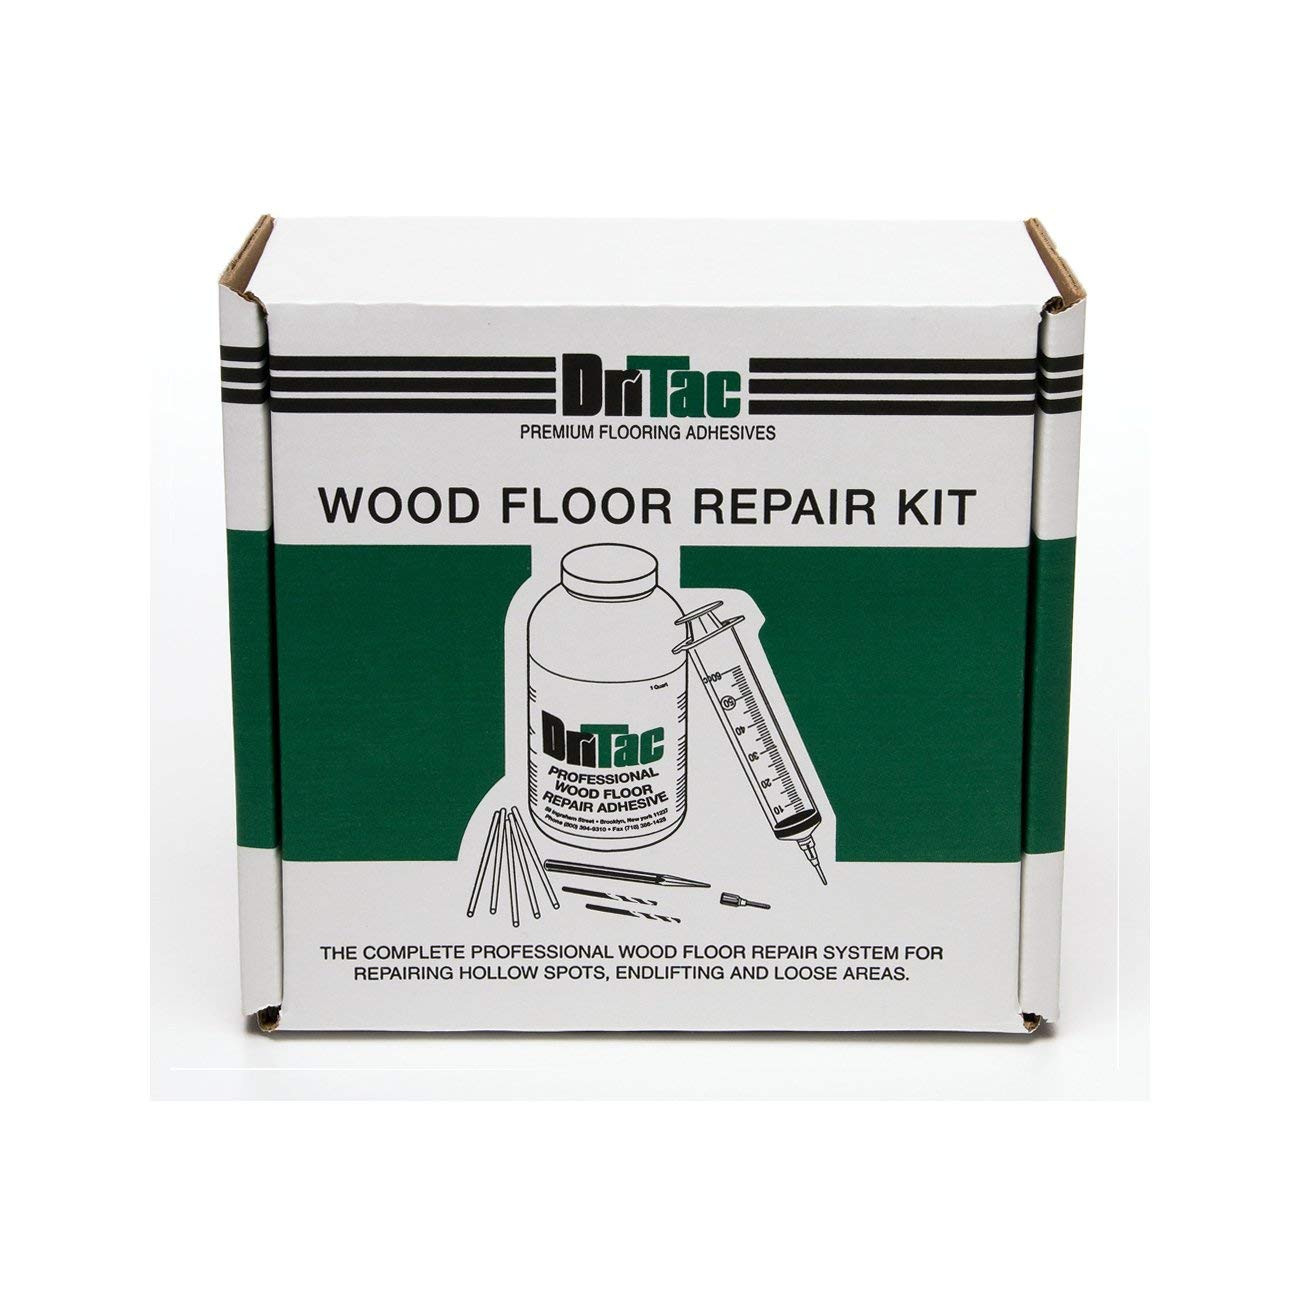 26 Fantastic How Much Does Home Depot Charge to Install Hardwood Floors 2022 free download how much does home depot charge to install hardwood floors of amazon com dritac wood floor repair kit engineered flooring only regarding amazon com dritac wood floor repair kit engineered fl